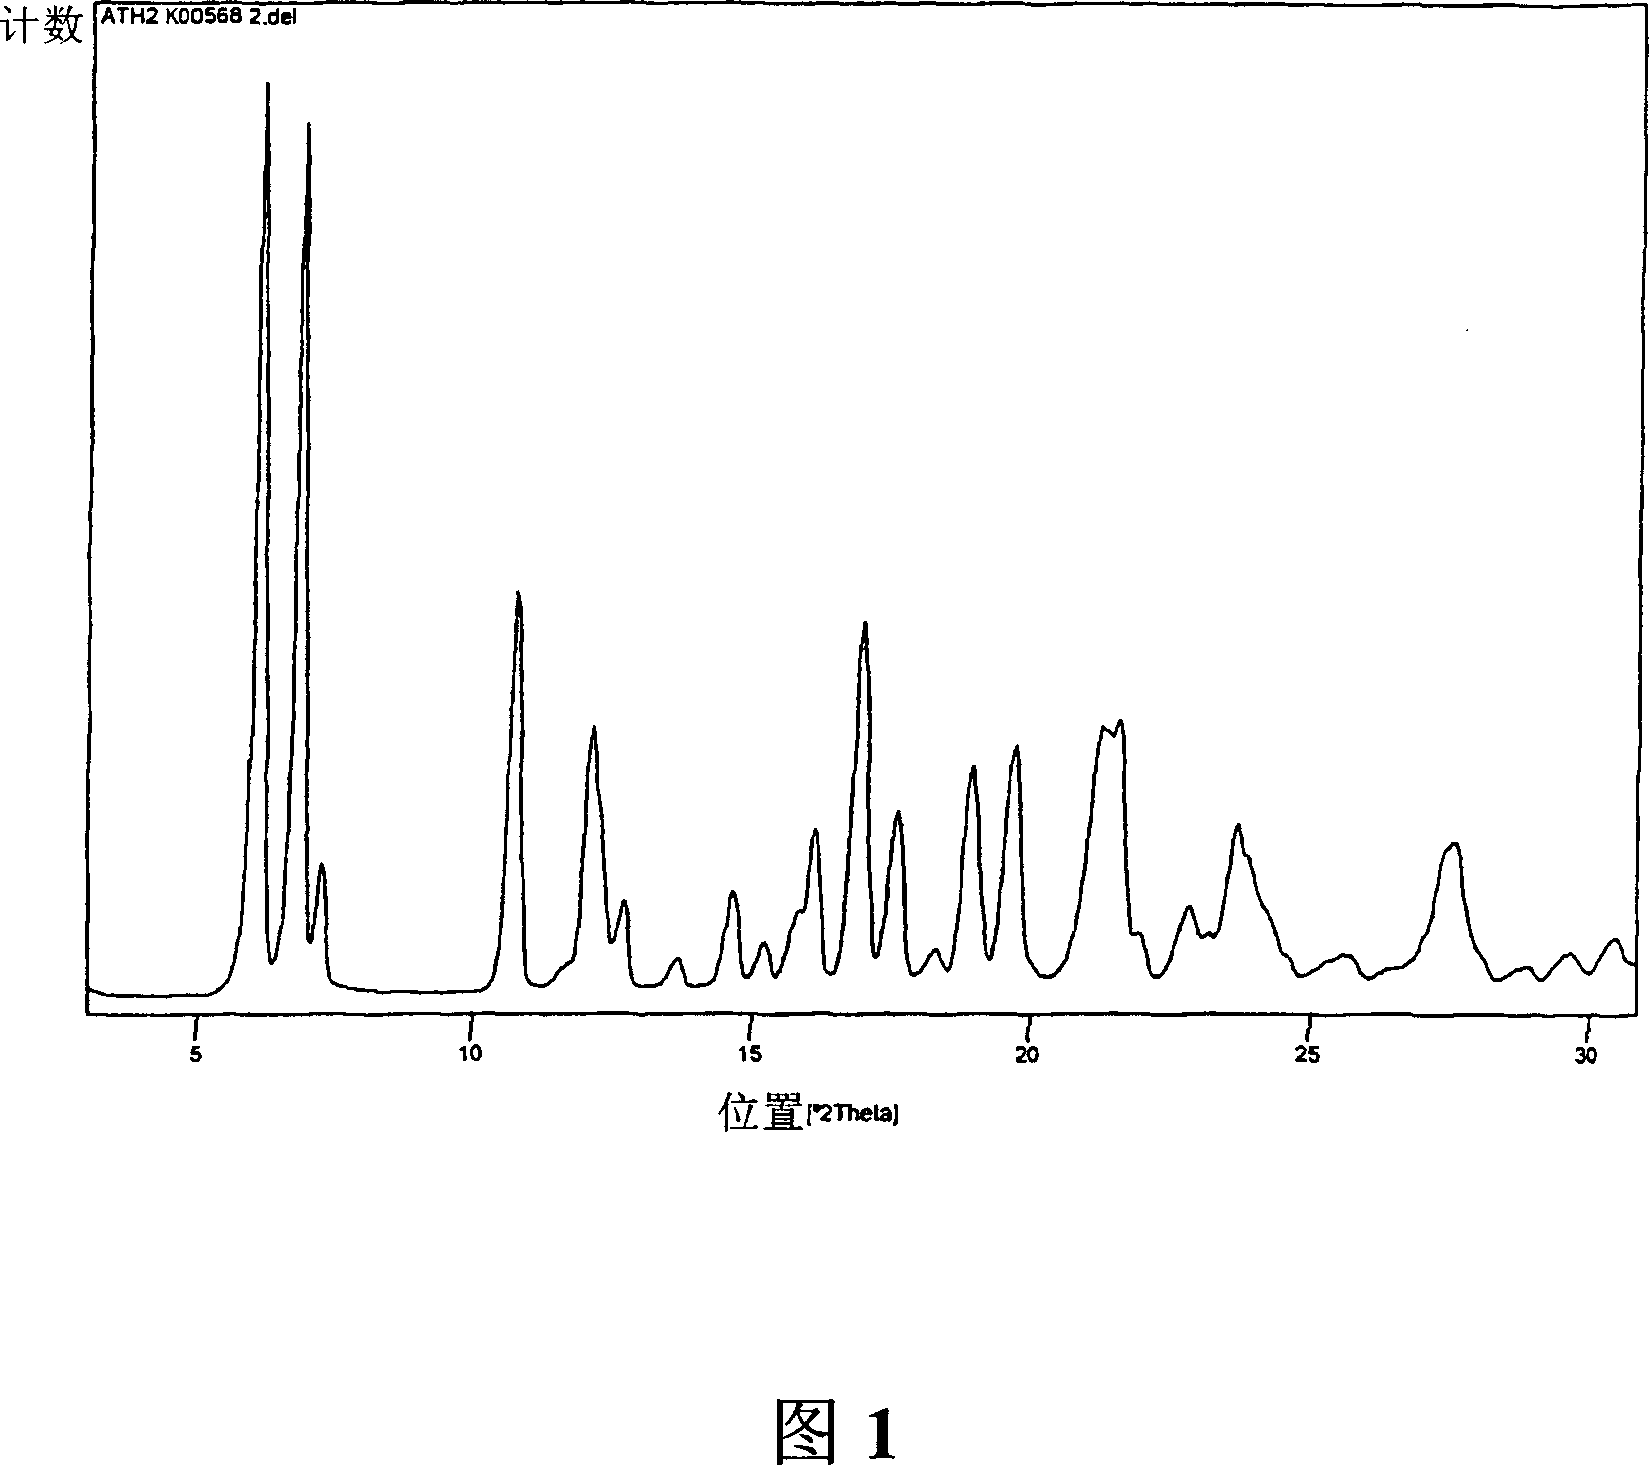 Polymorphs of atorvastatin tert.-butylester and use as intermediates for the preparation of atorvastatin